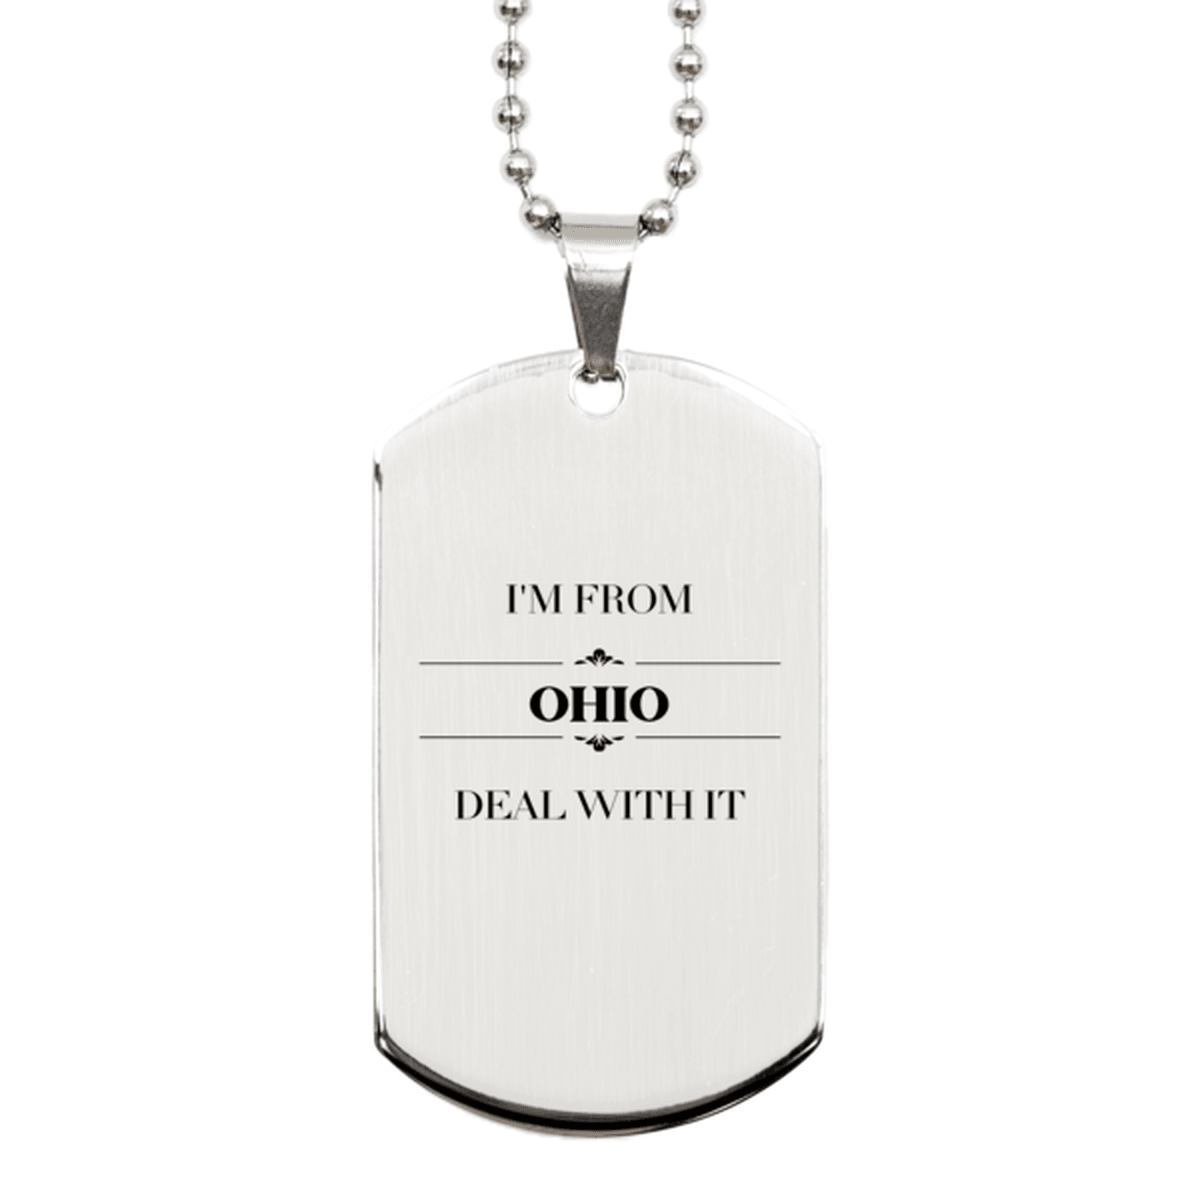 I'm from Ohio, Deal with it, Proud Ohio State Gifts, Ohio Silver Dog Tag Gift Idea, Christmas Gifts for Ohio People, Coworkers, Colleague - Mallard Moon Gift Shop